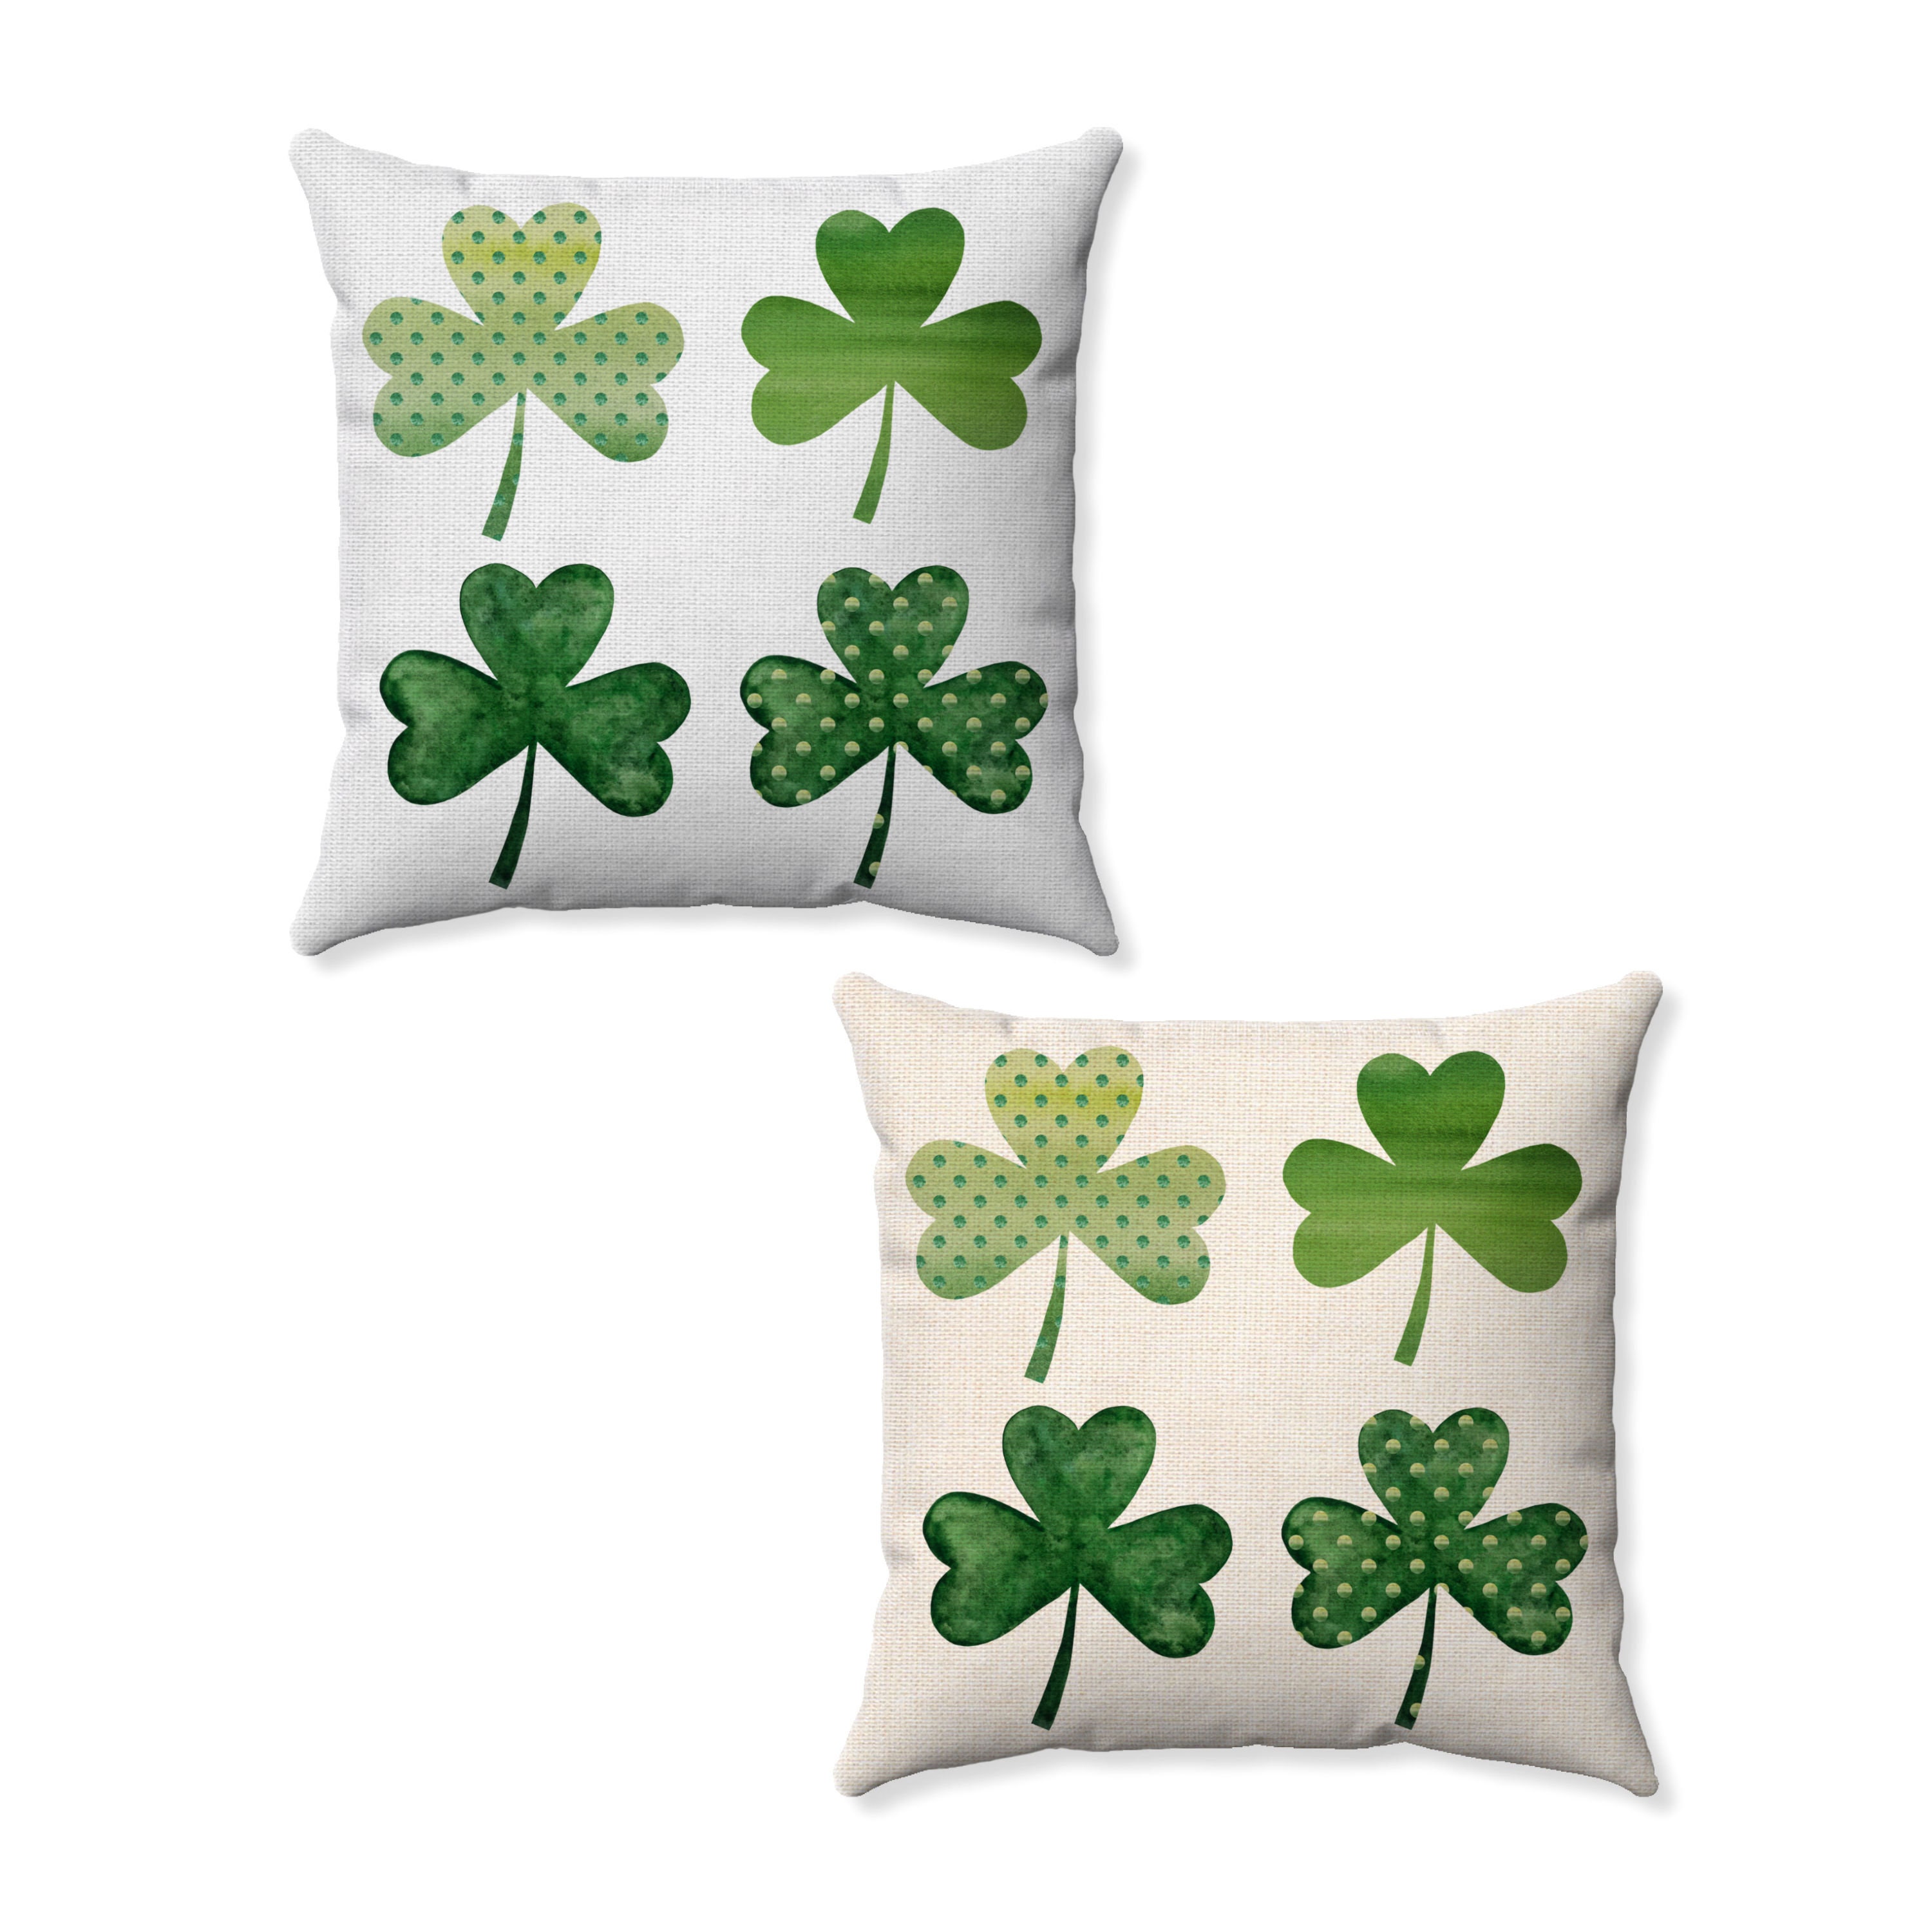 Yakuyir St Patricks Day Throw Pillow Covers 18x18 Set of 4 Linen Spring  Green Irish Shamrock Clover Lucky Home Decor Happy St Patrick''s Holiday  Outdoor Farmhouse Sofa Couch Accents Cushion Cases 